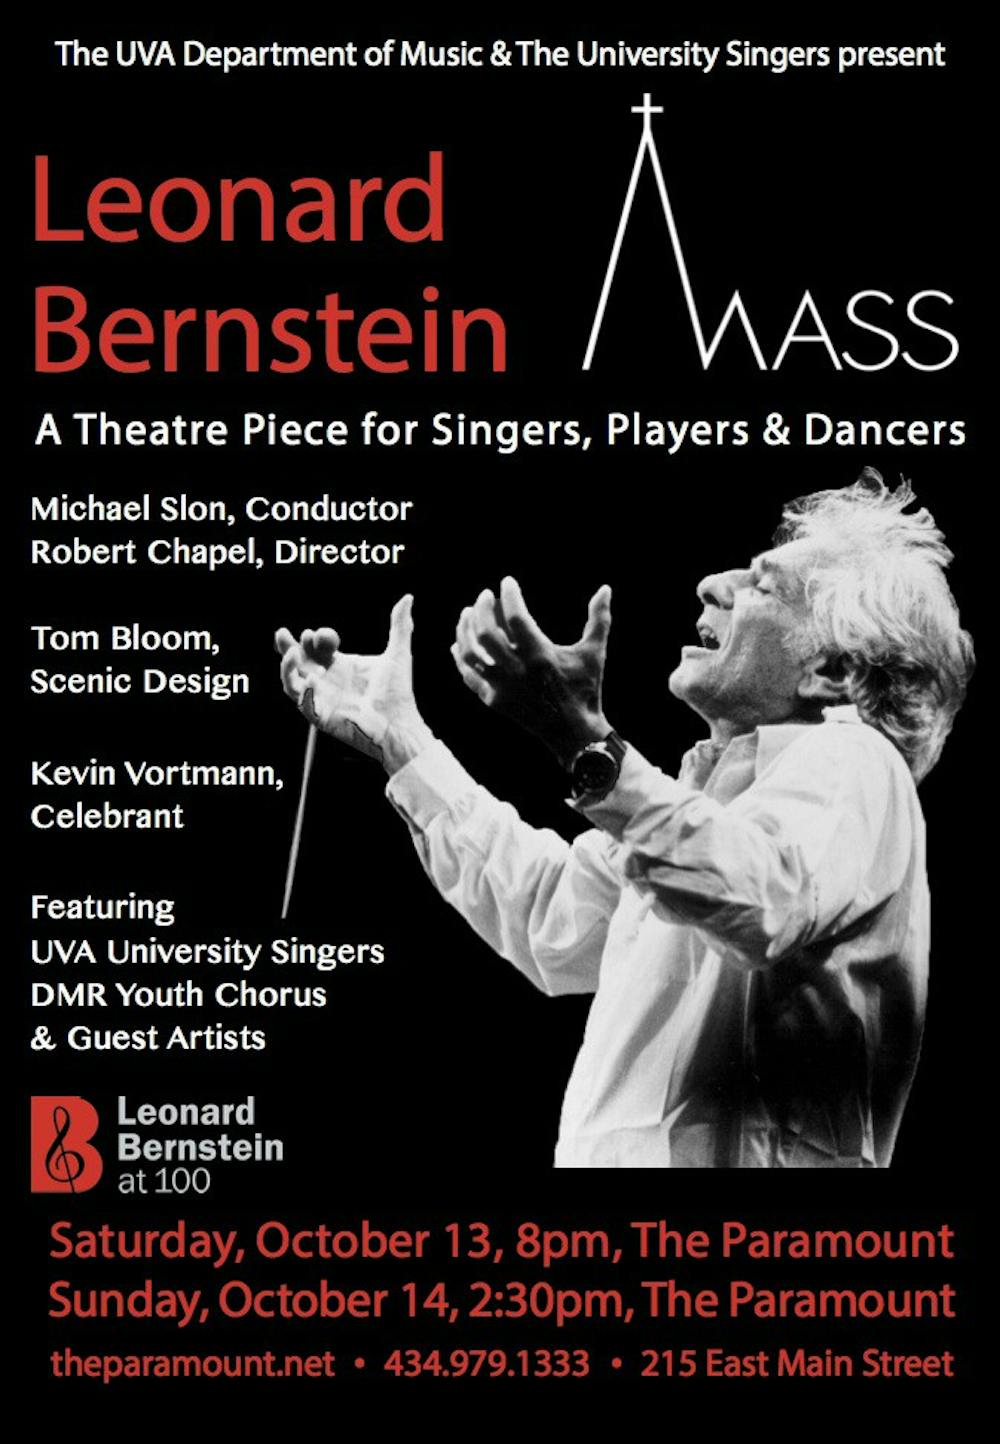 <p>The University Singers paired with the Department of Music to bring a rousing performance of Leonard Bernstein's "Mass" to the Paramount Theater Sunday.</p>